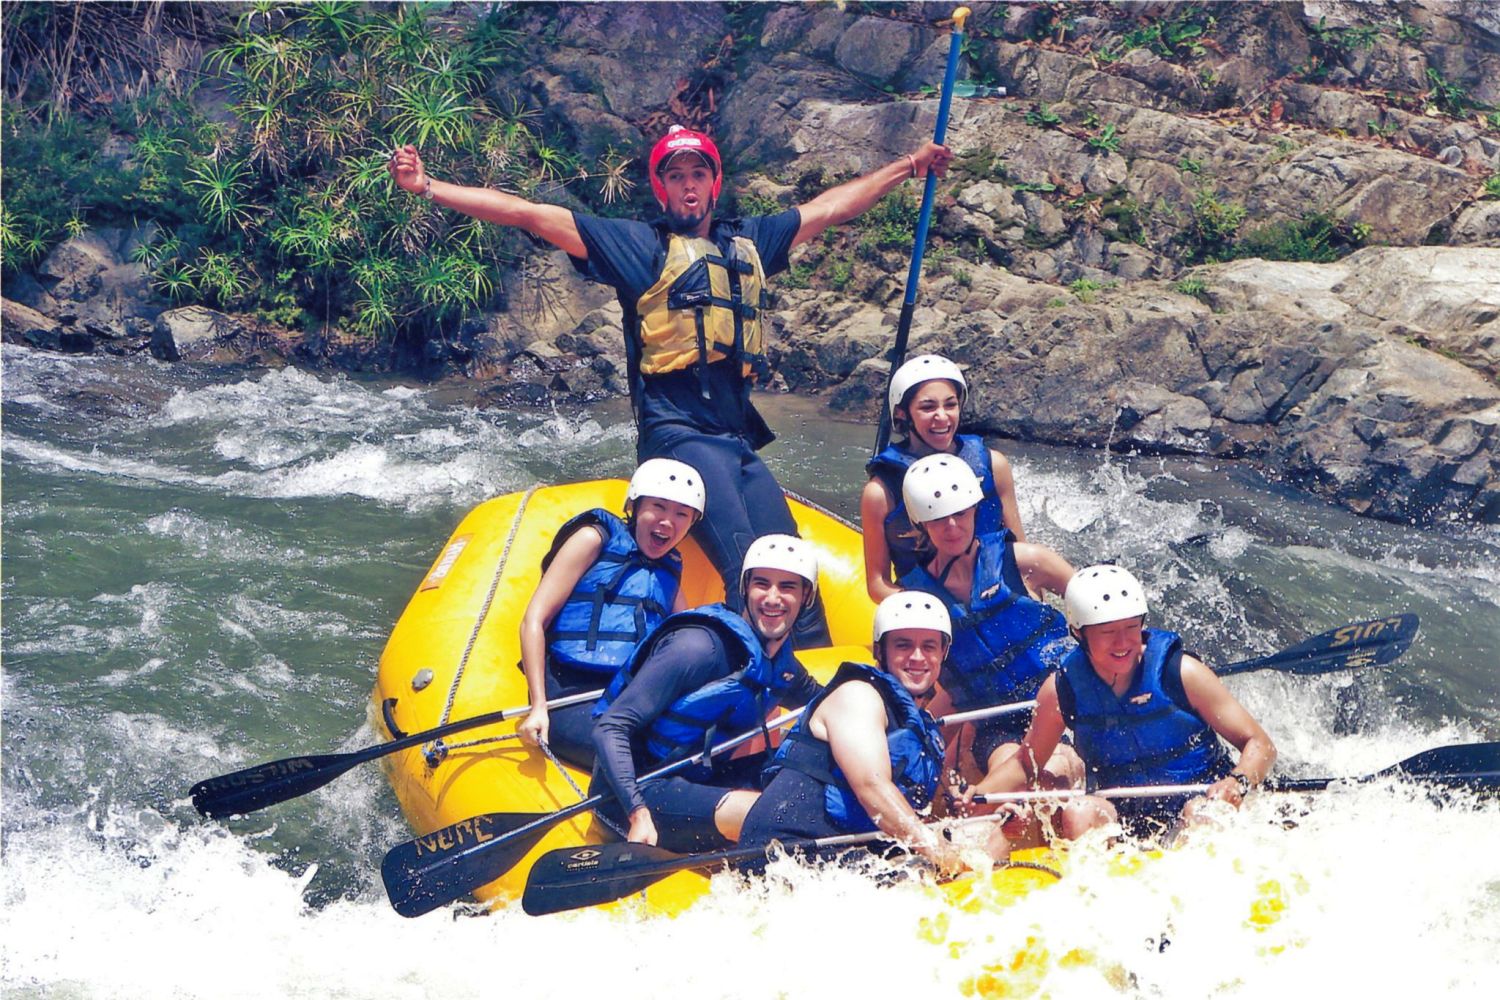 Whitewater rafting in the Dominican Republic